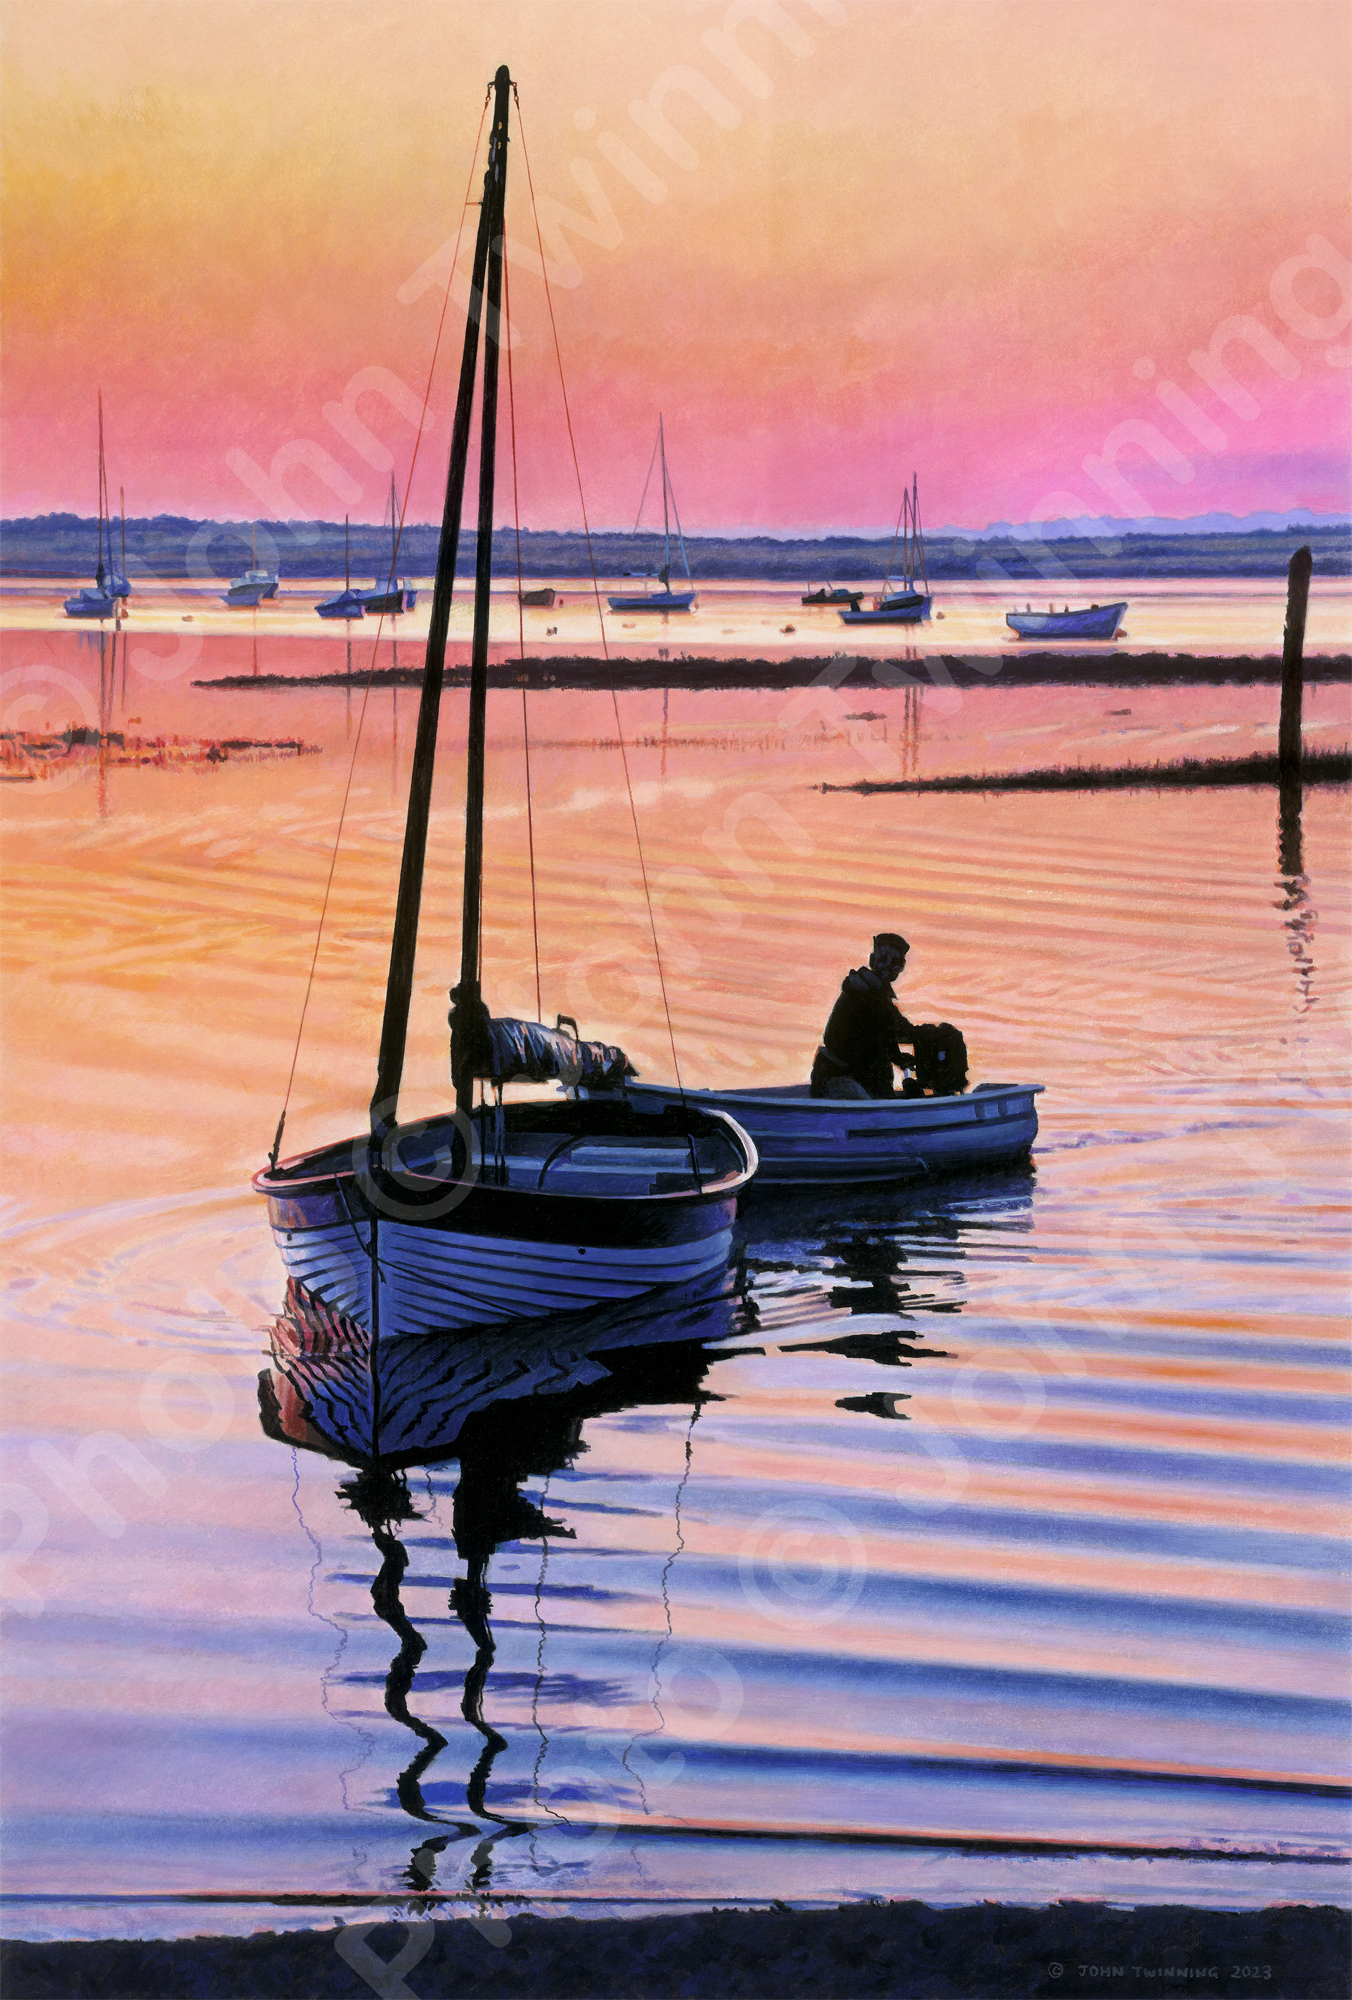 'Bringing Her Safely Home' - art print from a marine/maritime painting of boats at brancaster staithe, norfolk